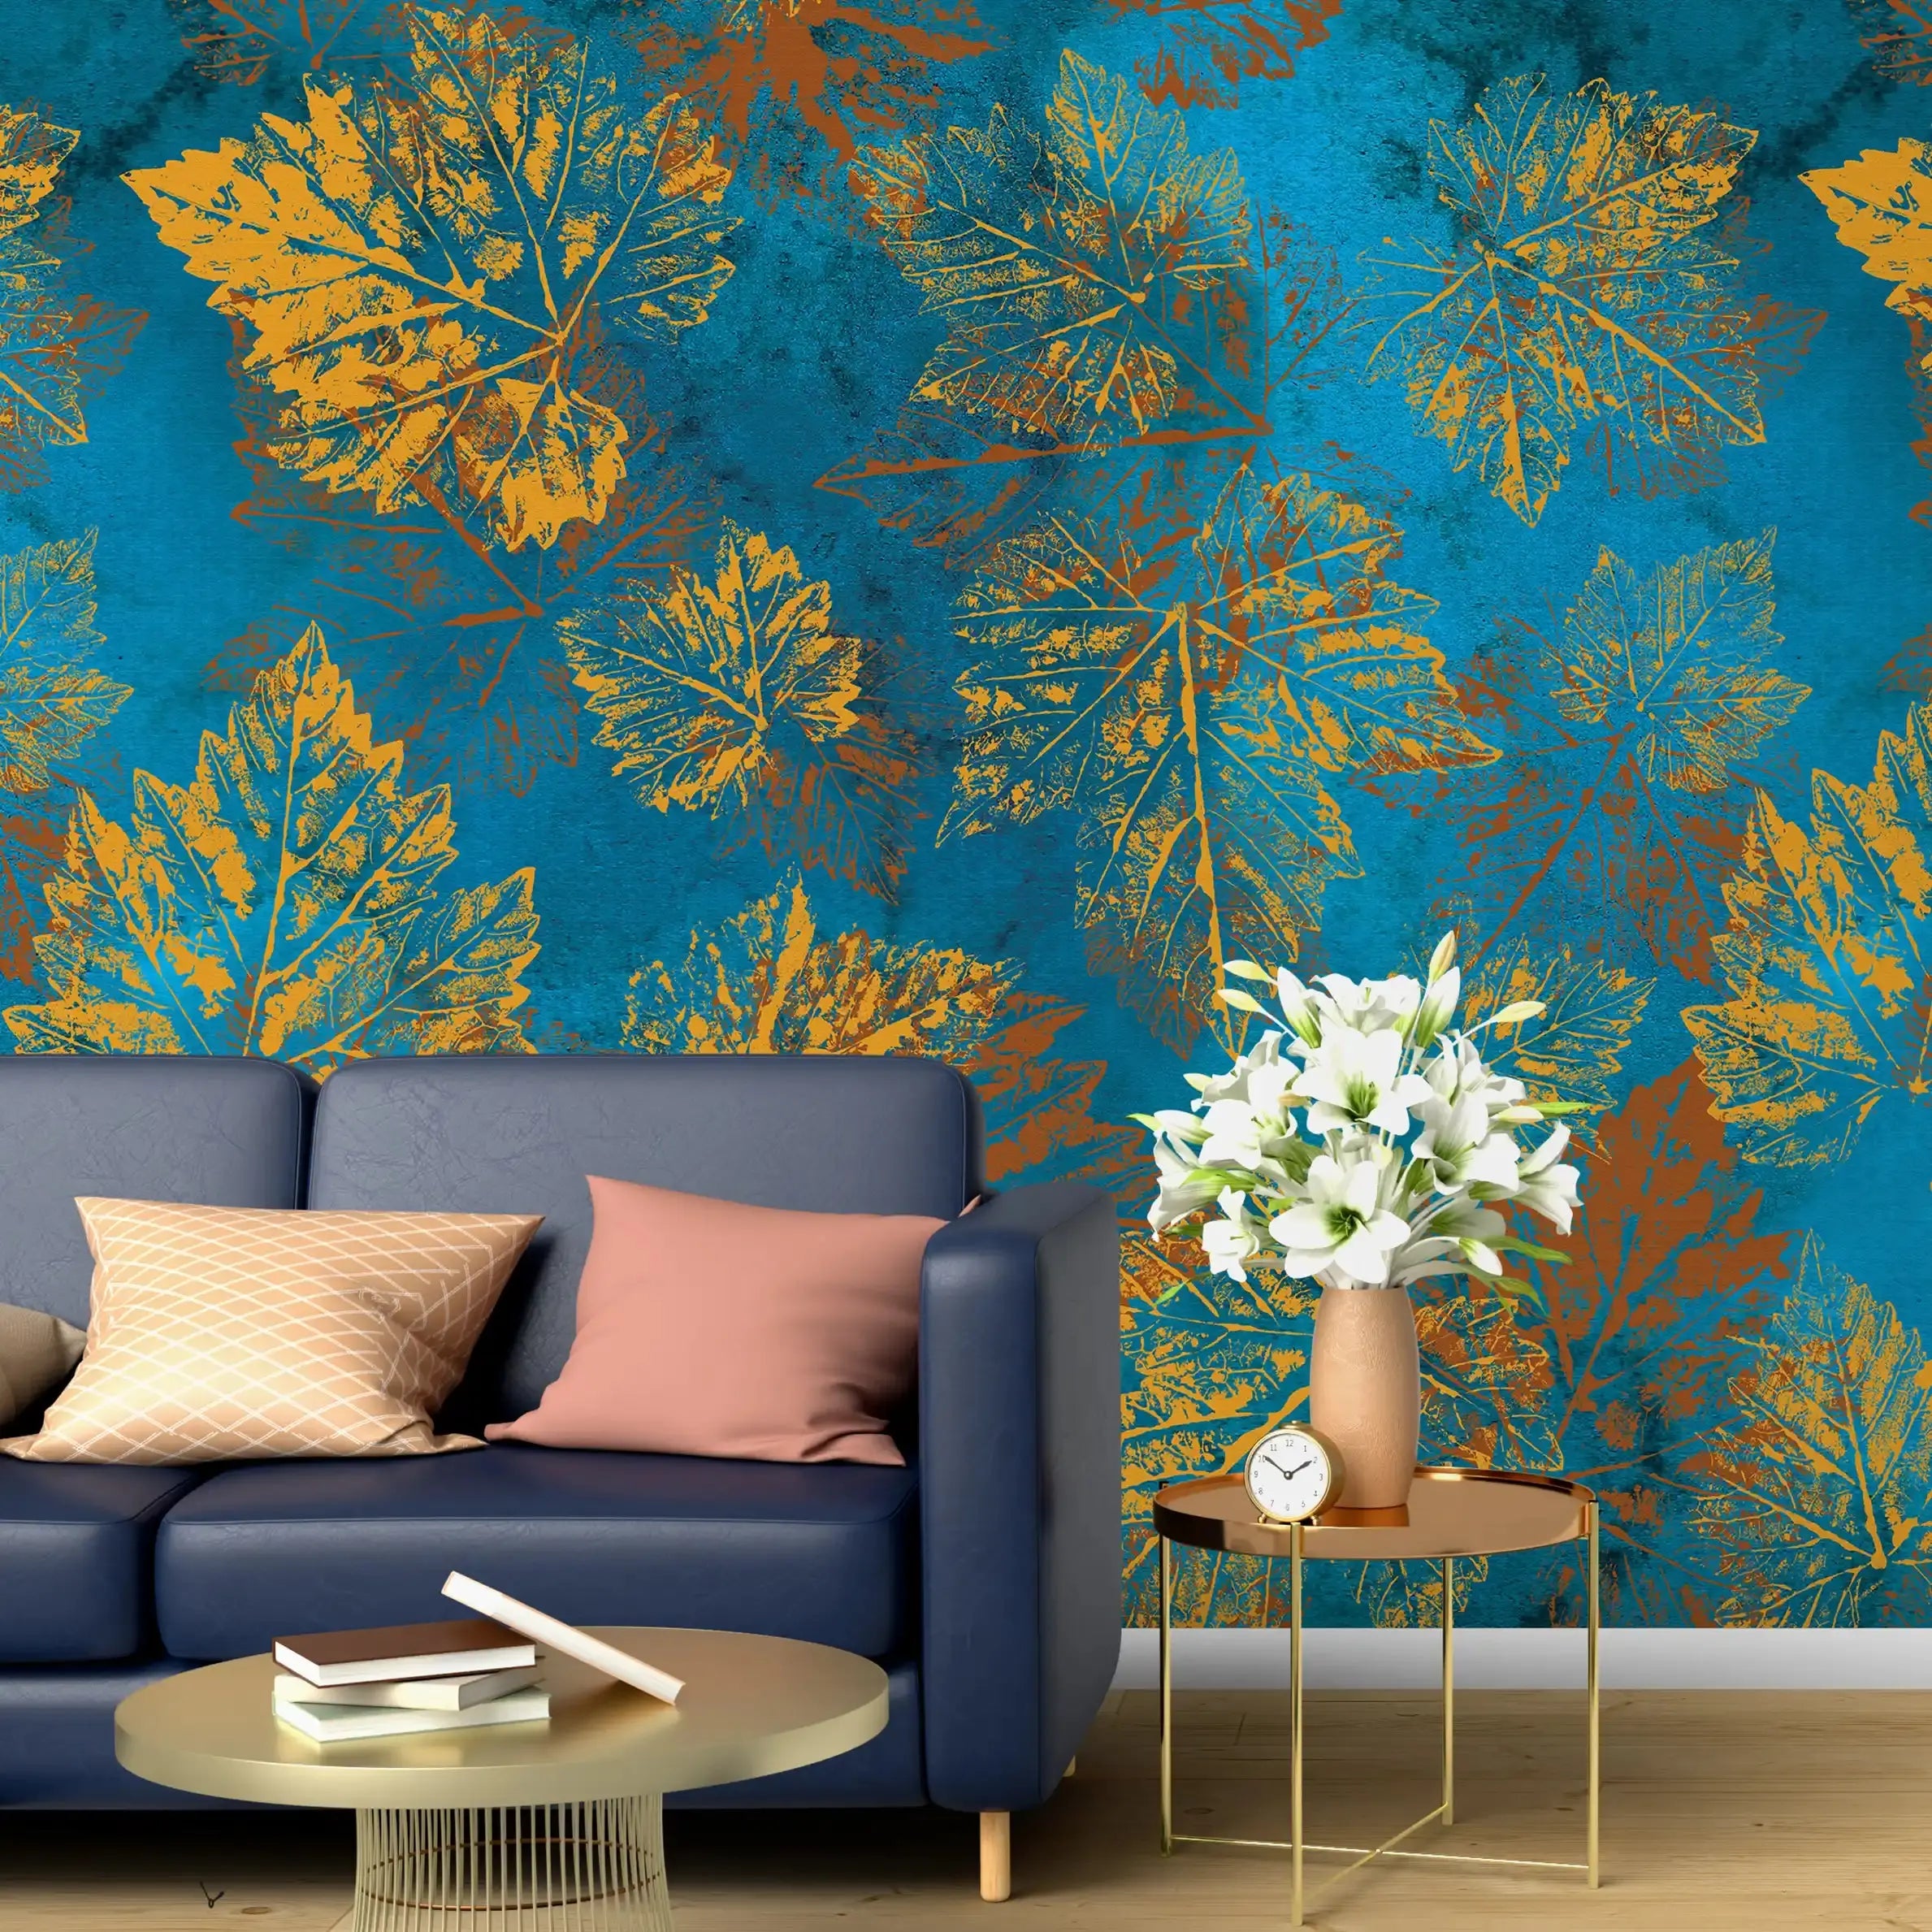 3072-B / Vintage Floral Mural Peel and Stick Wallpaper - Yellow and Brown Nature-Inspired Wall Decor for Modern Homes - Artevella